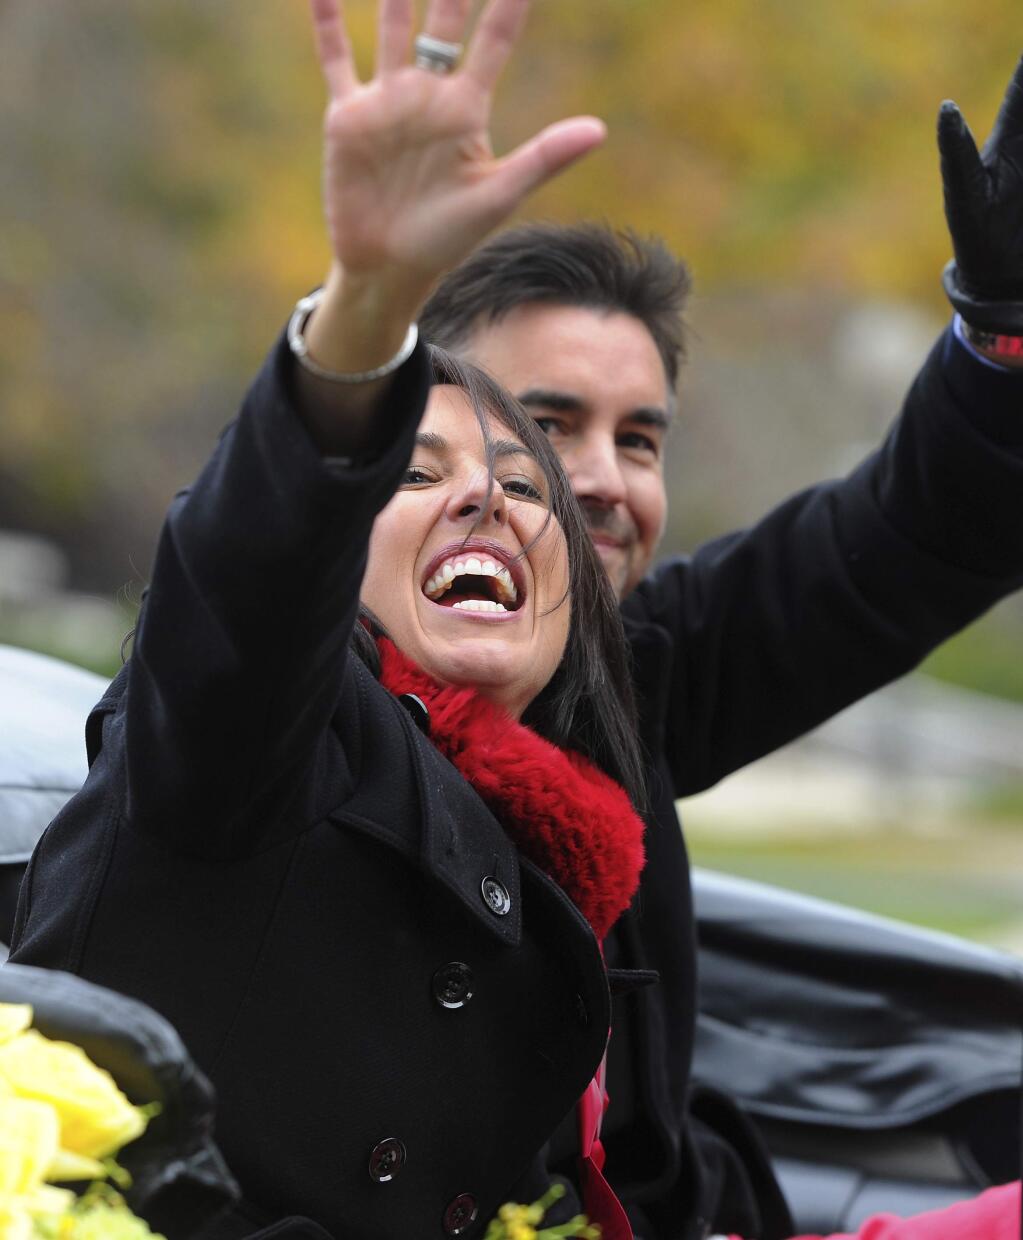 Grand Marshal Olympian Janet Evans, left, waves to the crowd at the 128th Rose Parade in Pasadena, Calif., Monday, Jan. 2, 2017. (AP Photo/Michael Owen Baker)